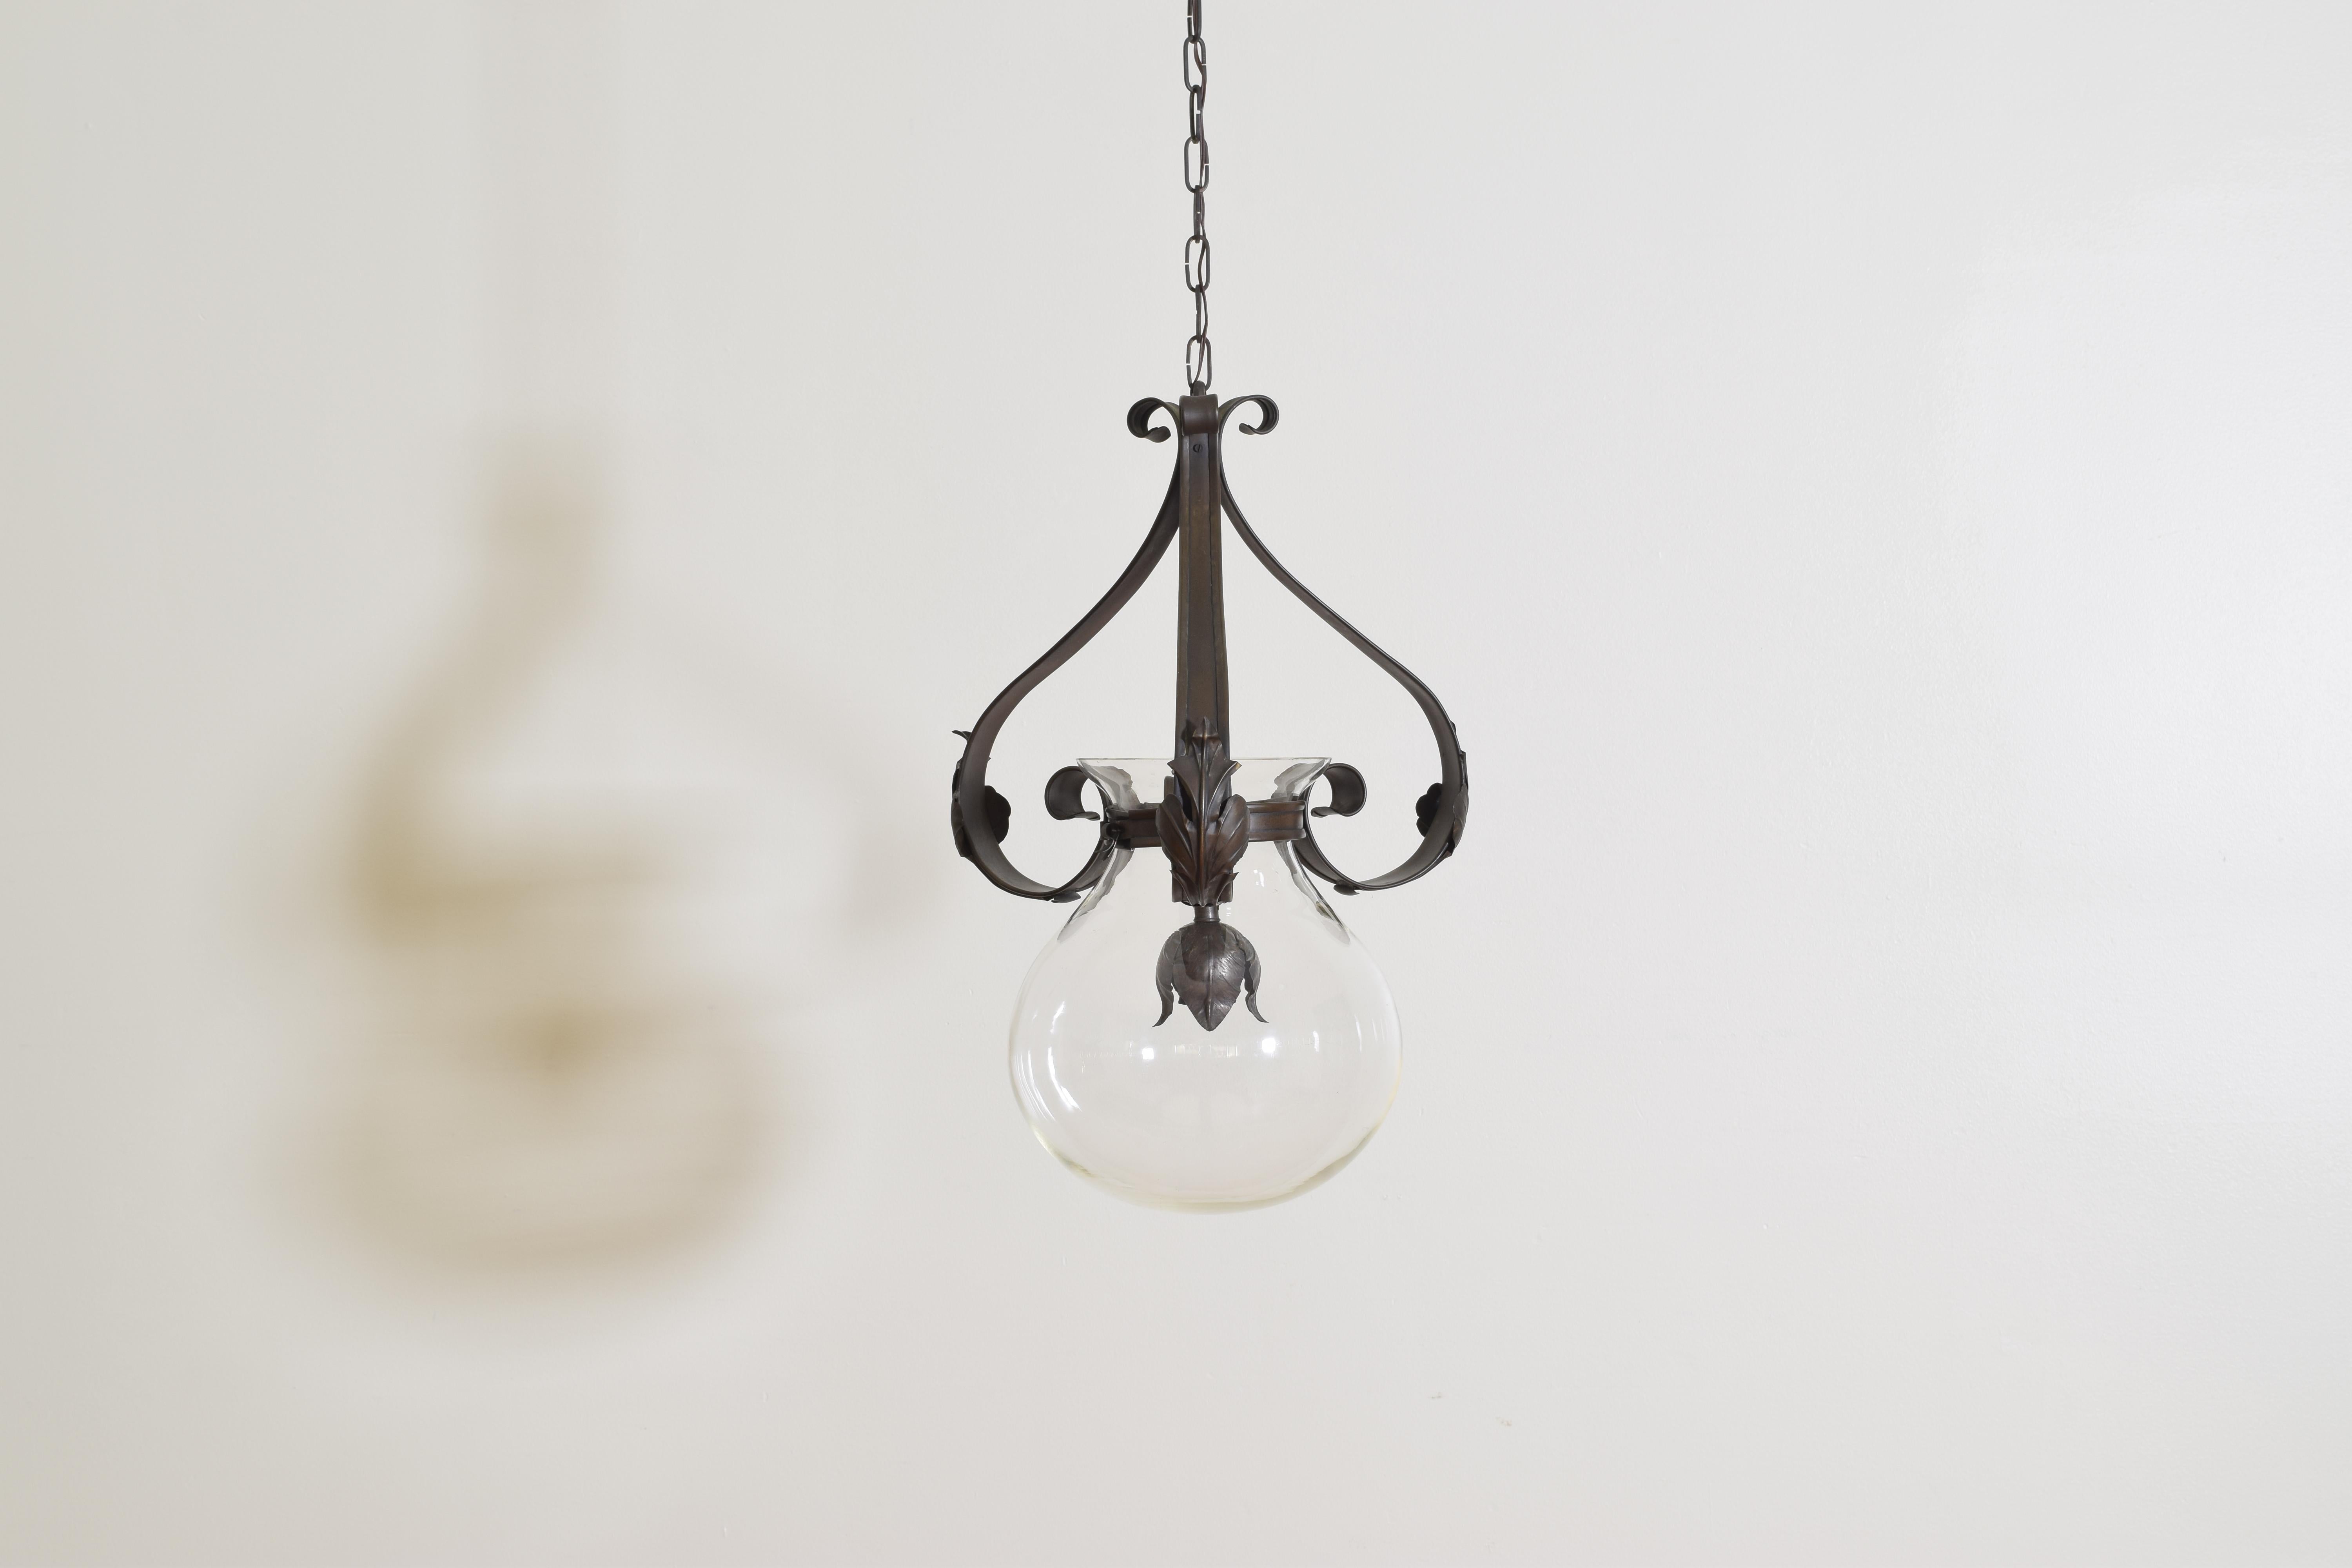 Baroque Italian Patinated Brass and Glass Hanging Pendant Light, Early 20th Century